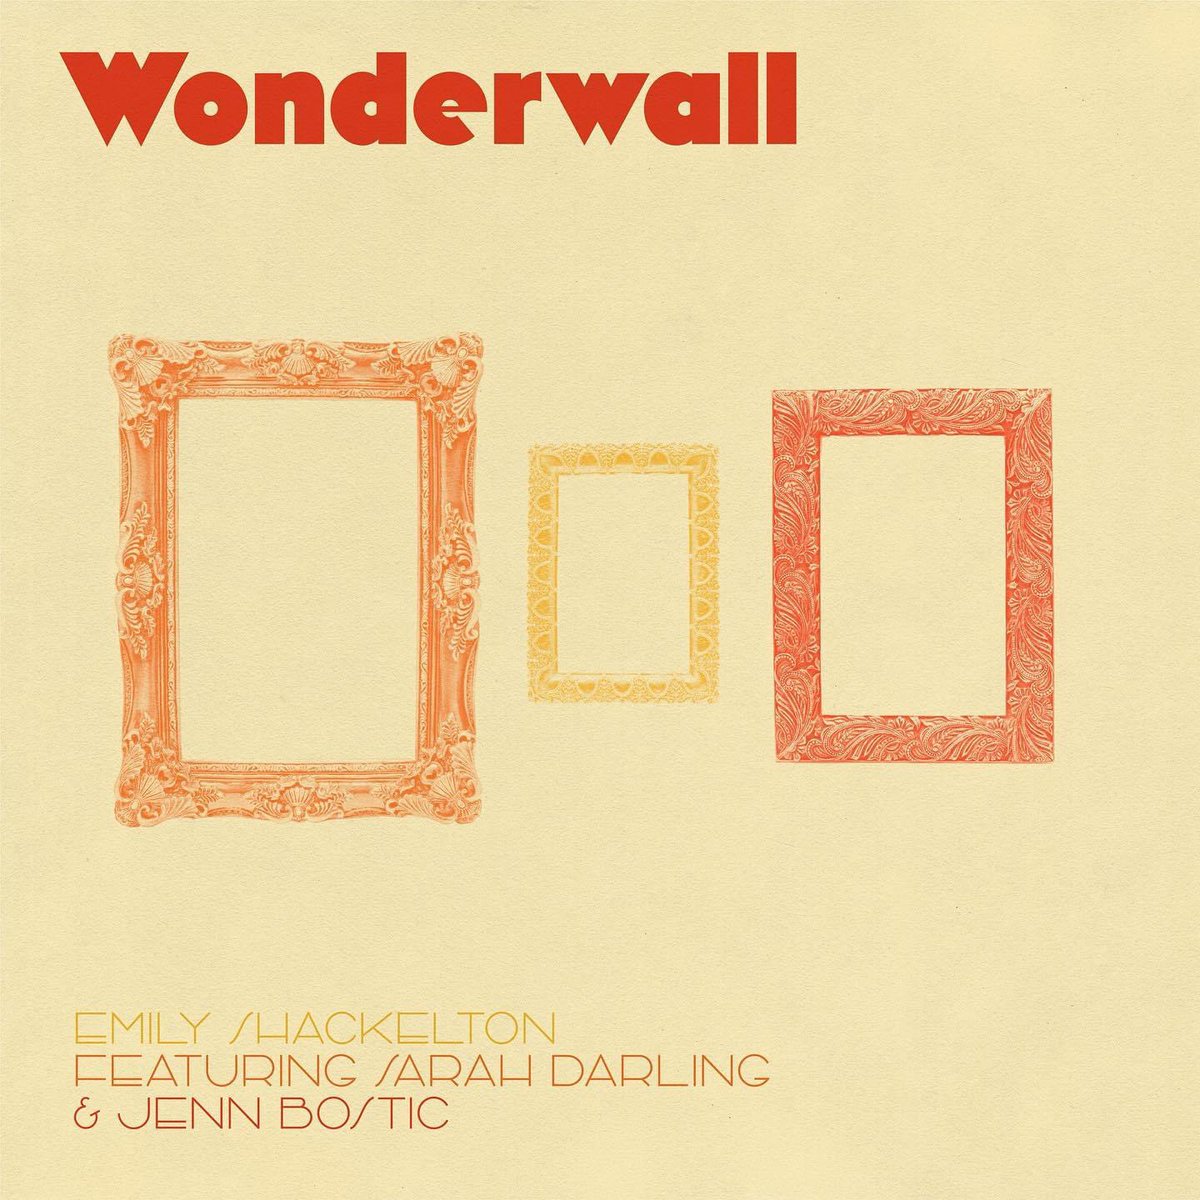 'Wonderwall'OUT NOW! This is the girls taking on @oasis and it's going to melt you into a sweet puddle. Thank you @emilyshackelton & @jennbostic for making Beauty with me. STREAM IT! 🖼️